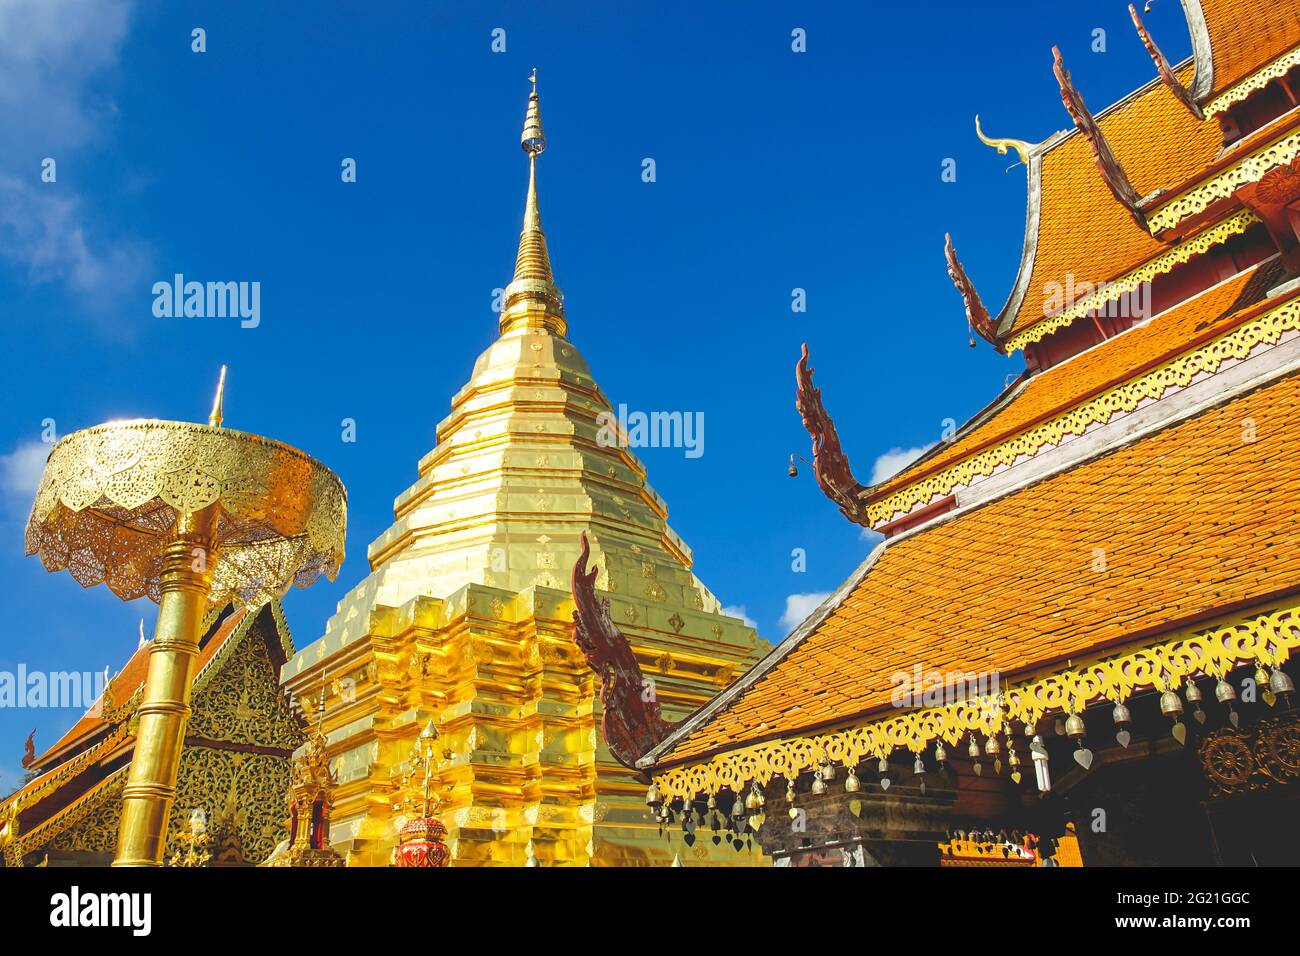 The world famous pagoda Phra That Doi Suthep in Chiang Mai province, Thailand. Stock Photo